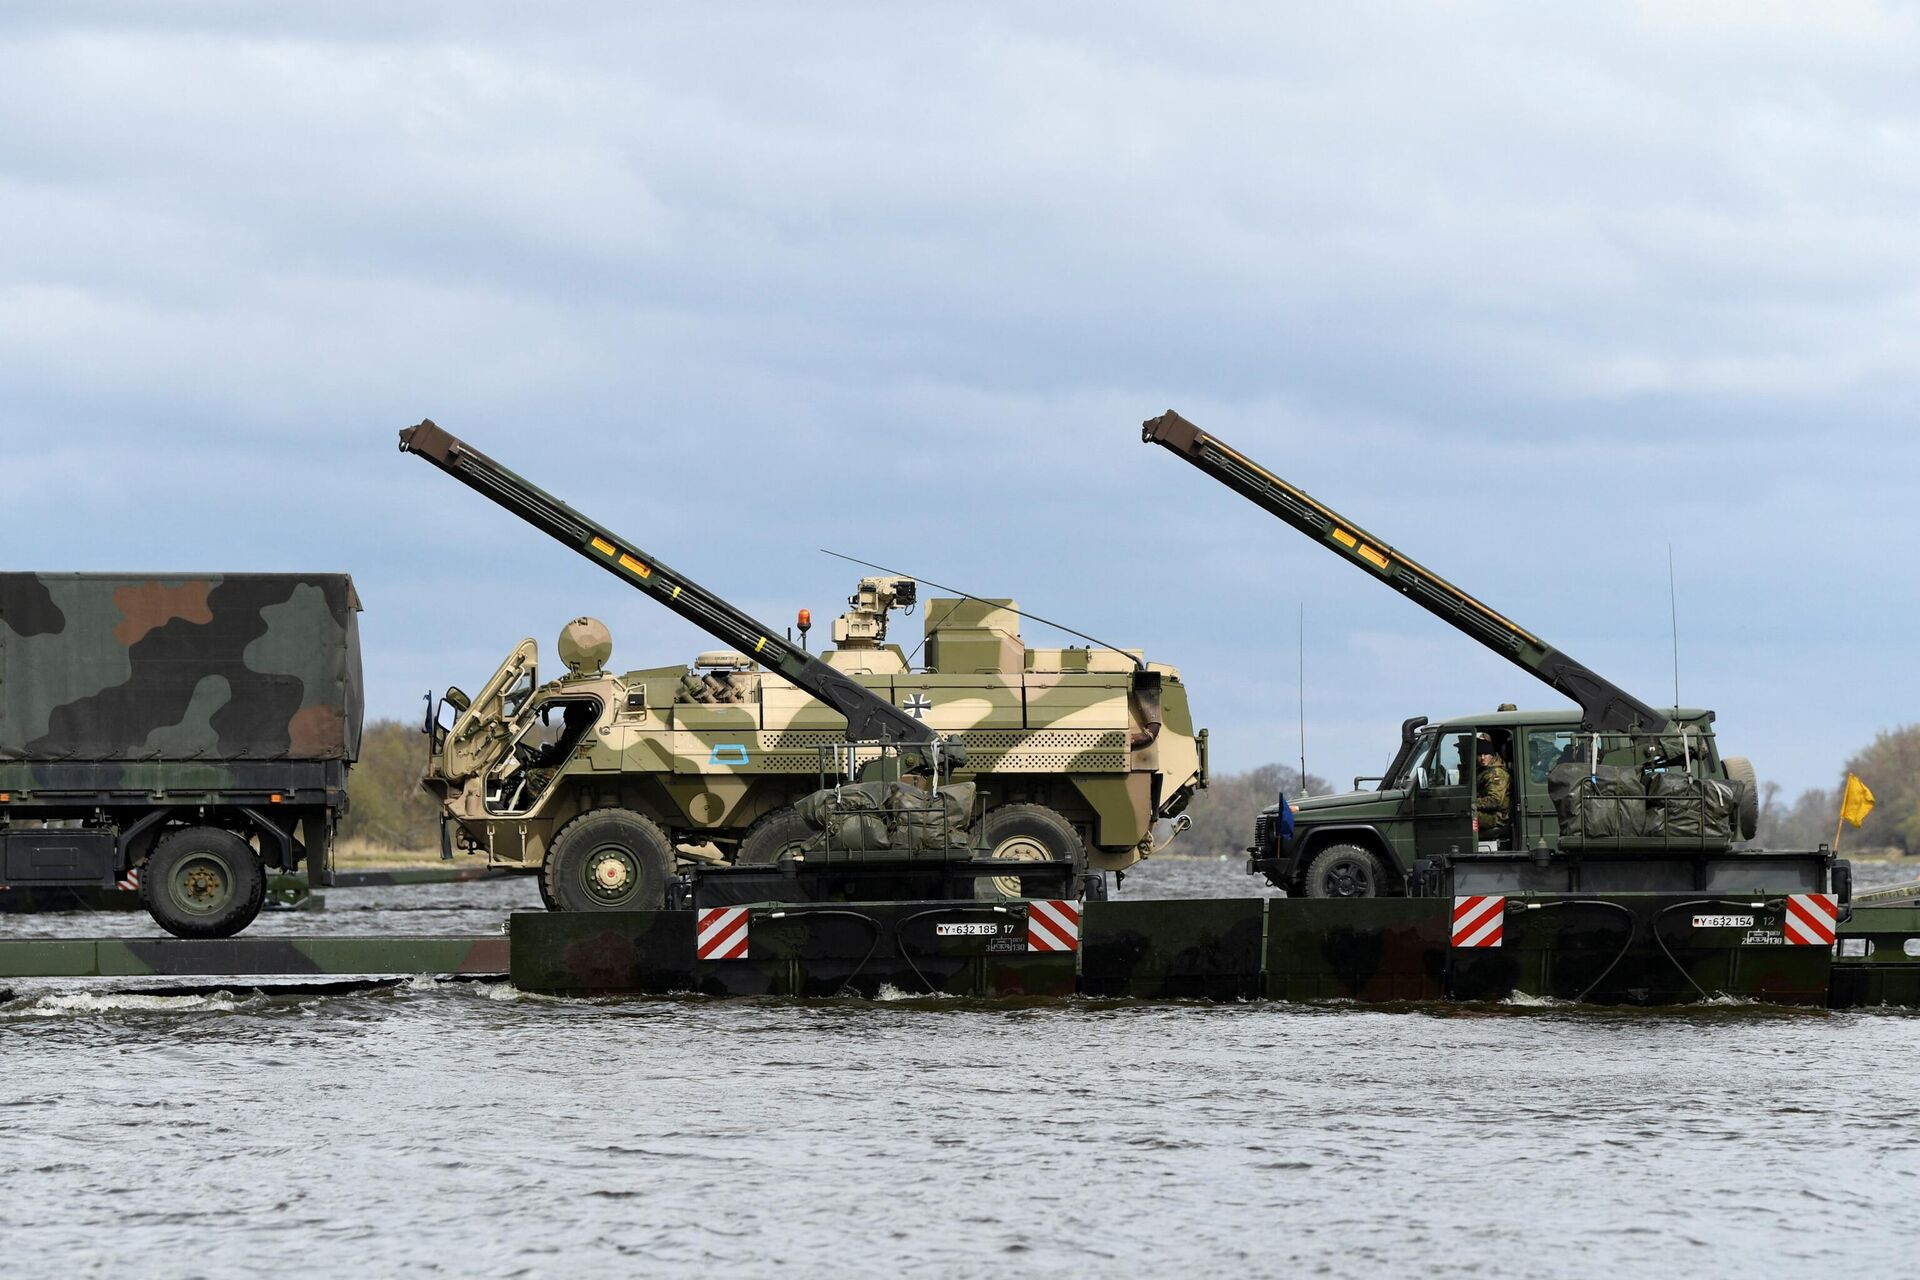 Soldiers and military vehicles of the 37th Panzergrenadier Brigade Free State of Saxony of the German Army Bundeswehr, intended for the 'Very High Readiness Joint Task Force' (VJTF) of the 'NATO Response Force' (NRF), are ferried across the Elbe river using the Amphibian M3 floating bridge, during the 'Wettiner Schwert' exercise near Storkau, Germany April 2, 2022.  - Sputnik International, 1920, 14.04.2022